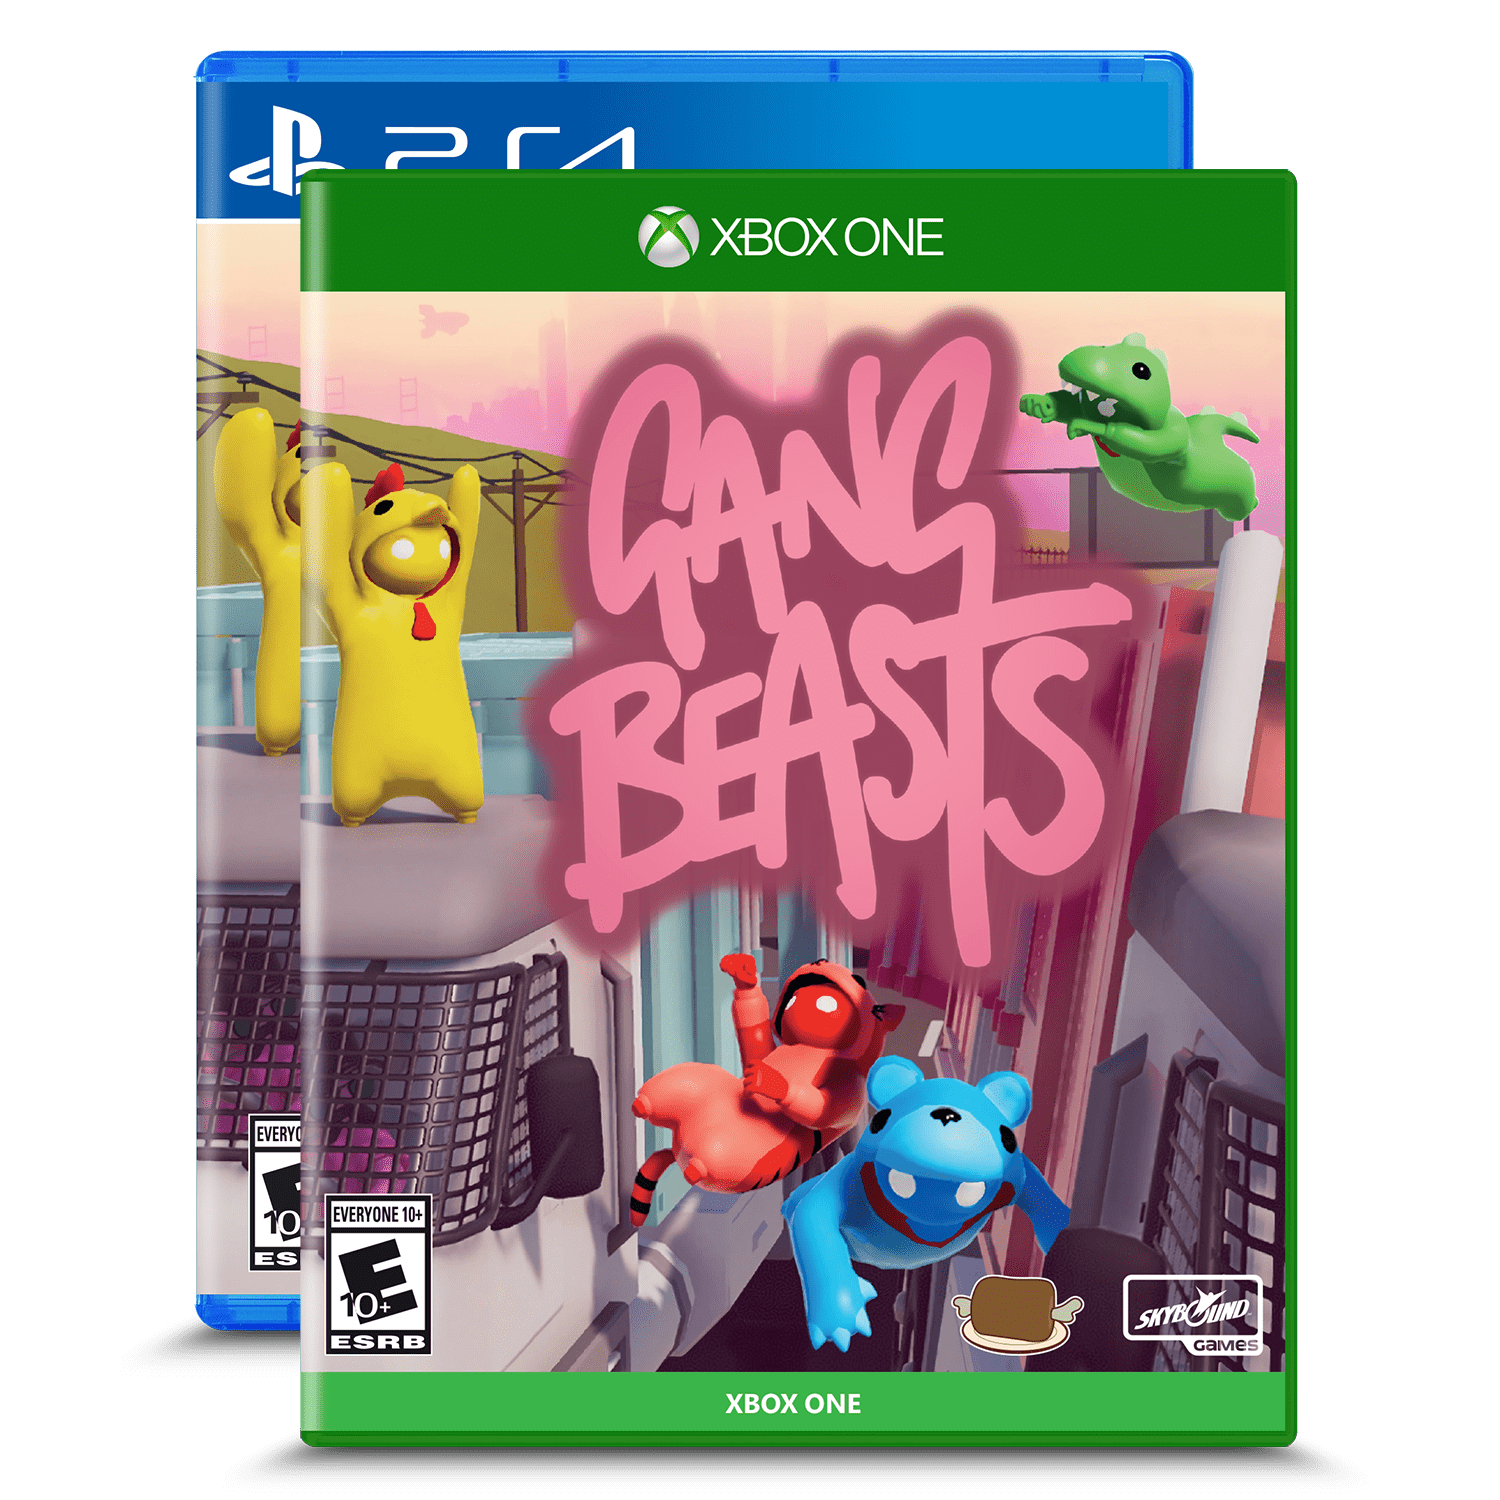 can you get gang beasts on xbox one